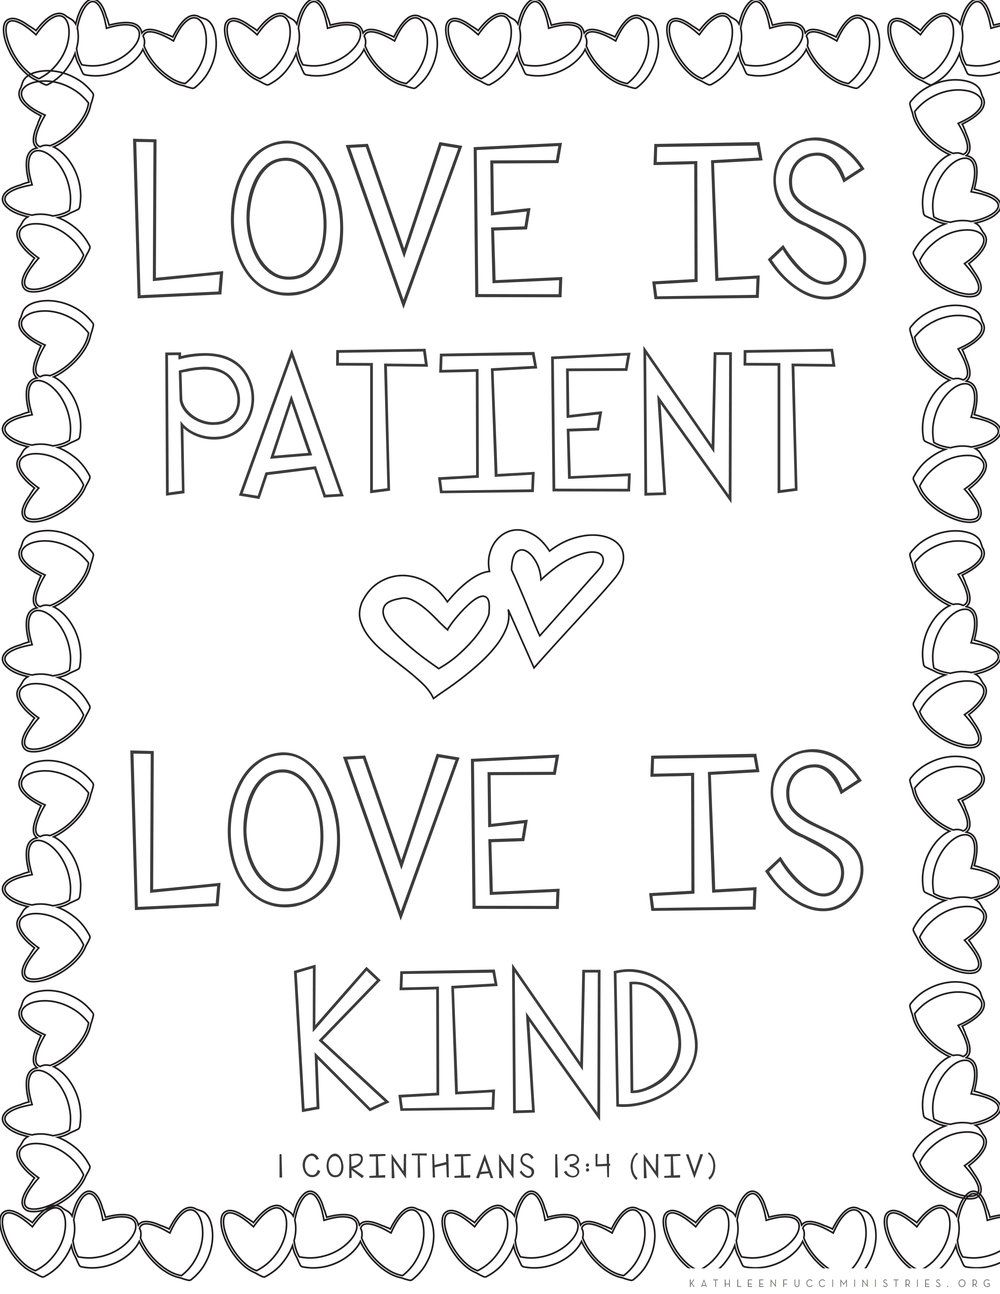 Free Bible Verse Coloring Pages | Bible coloring pages, Bible ...